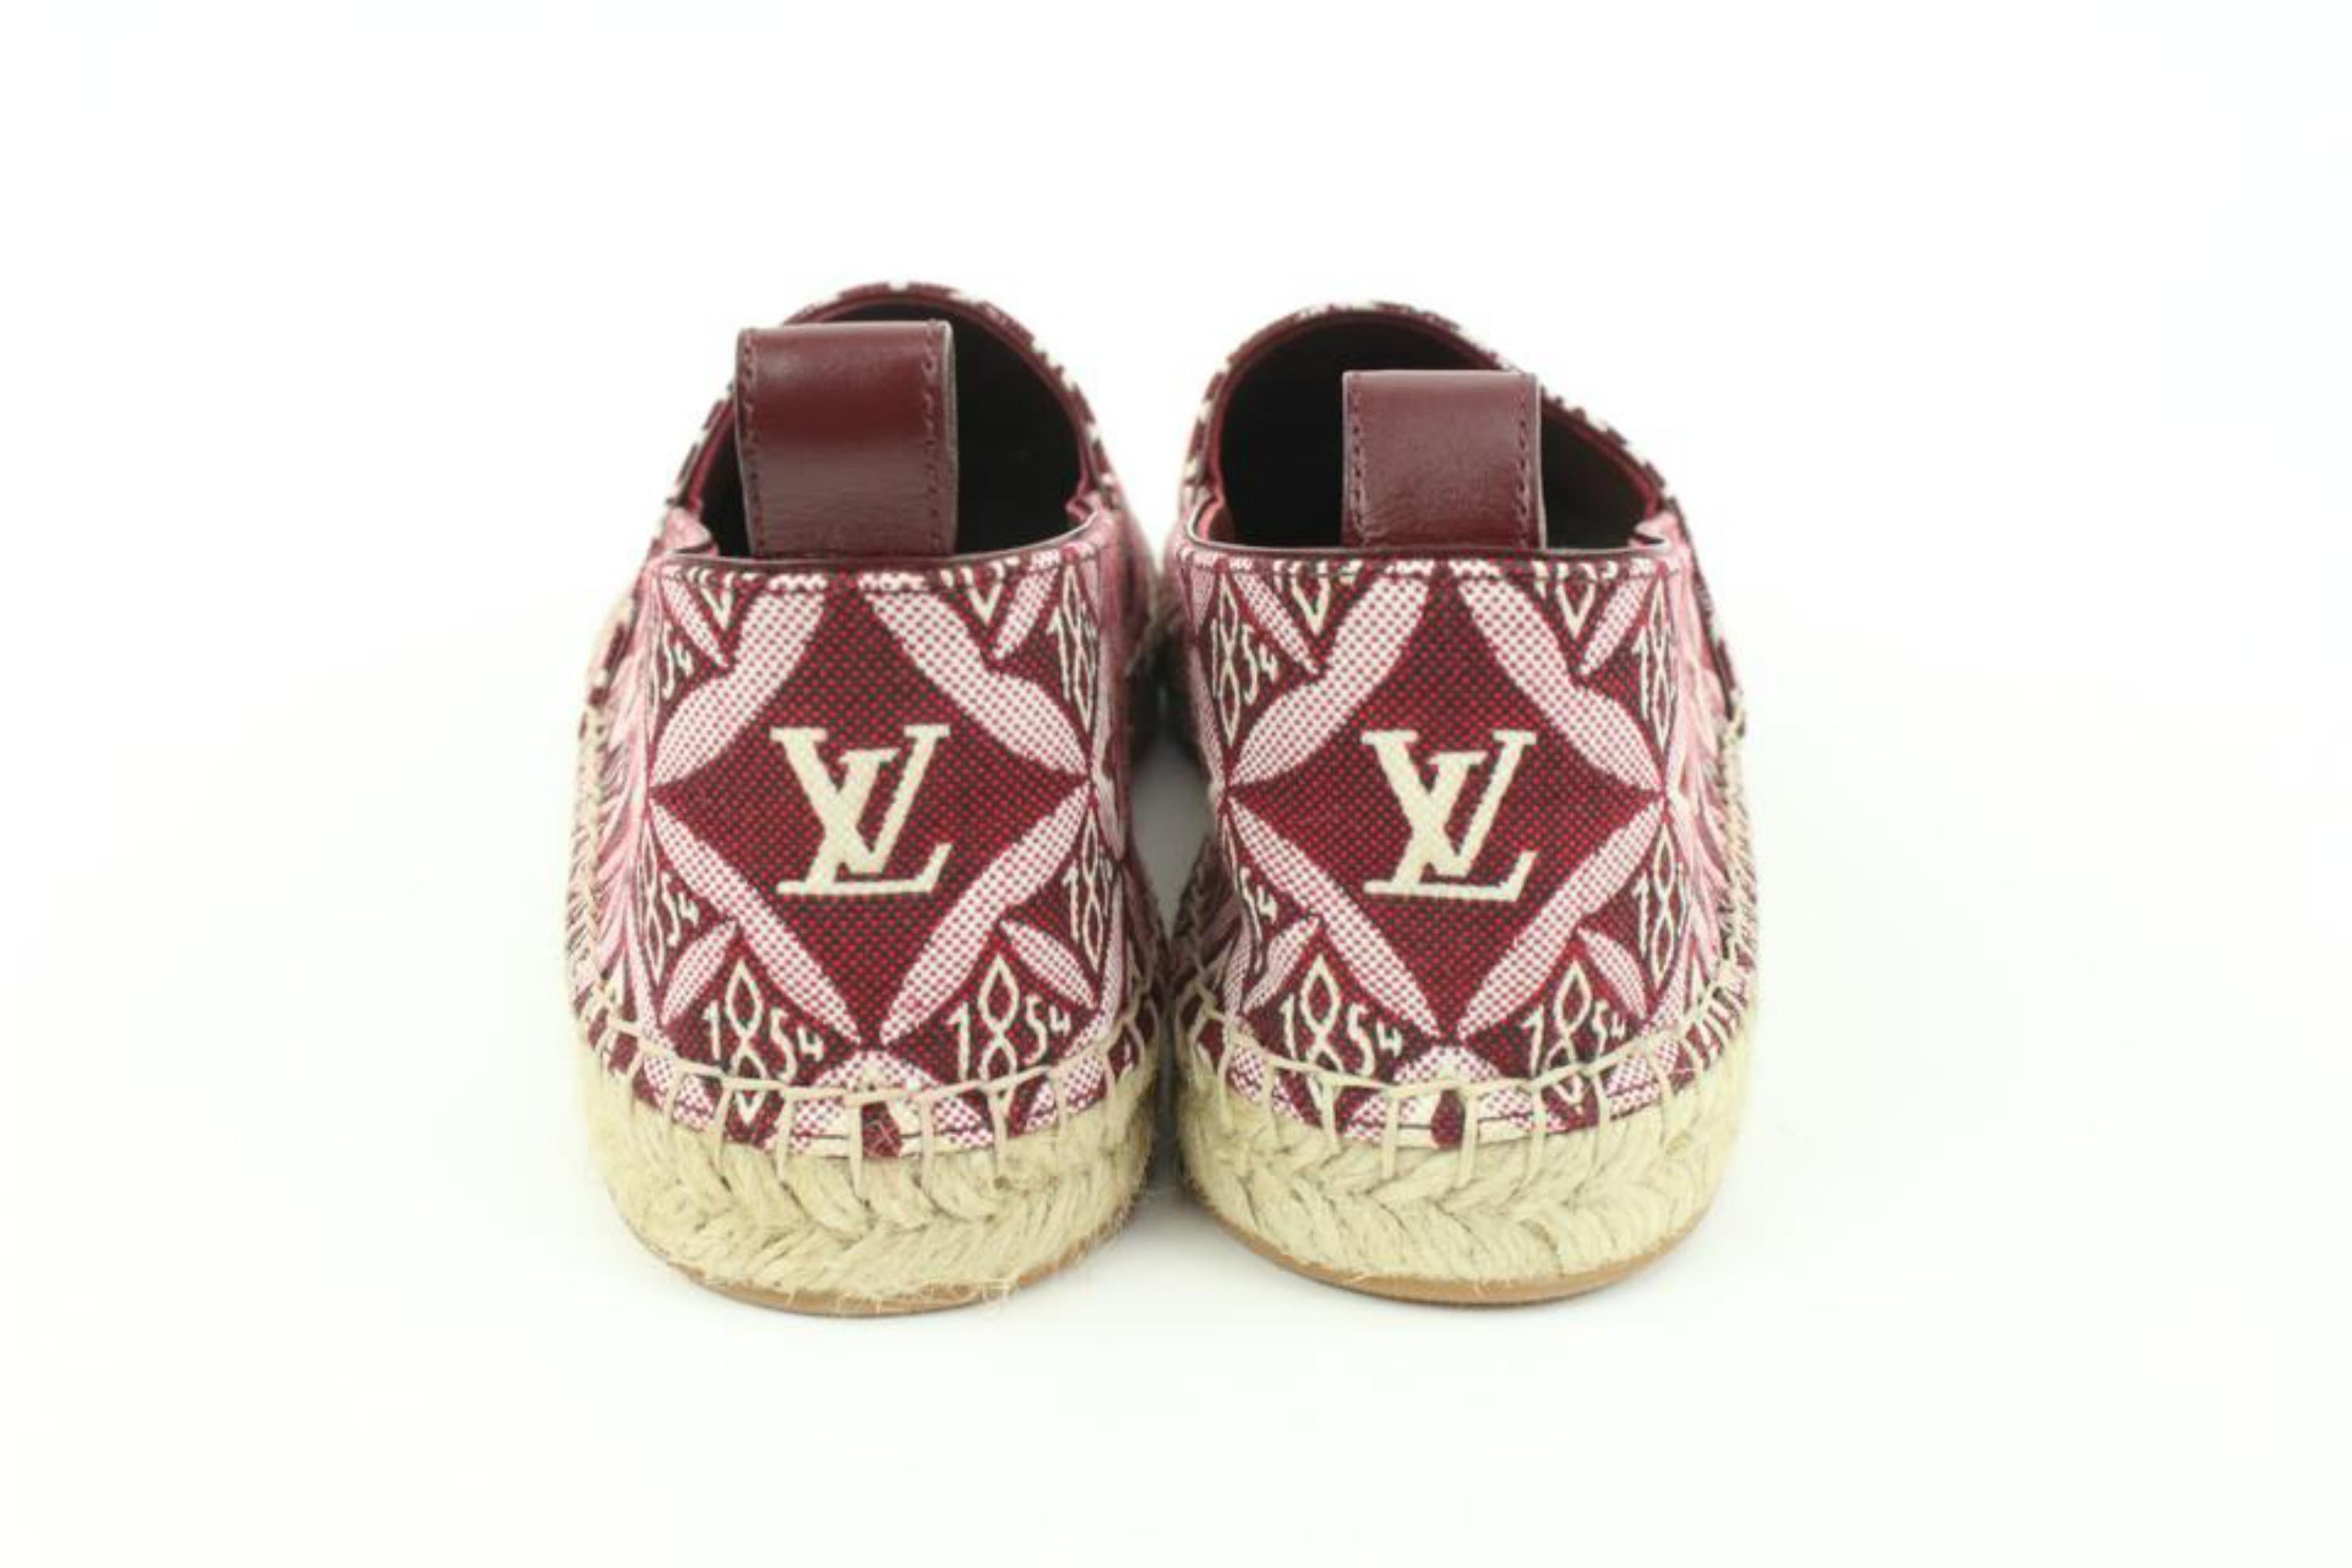 Louis Vuitton Sz 39.5 Burgundy Since 1854 Starboard Flat Espadrille s27lv99 In New Condition For Sale In Dix hills, NY